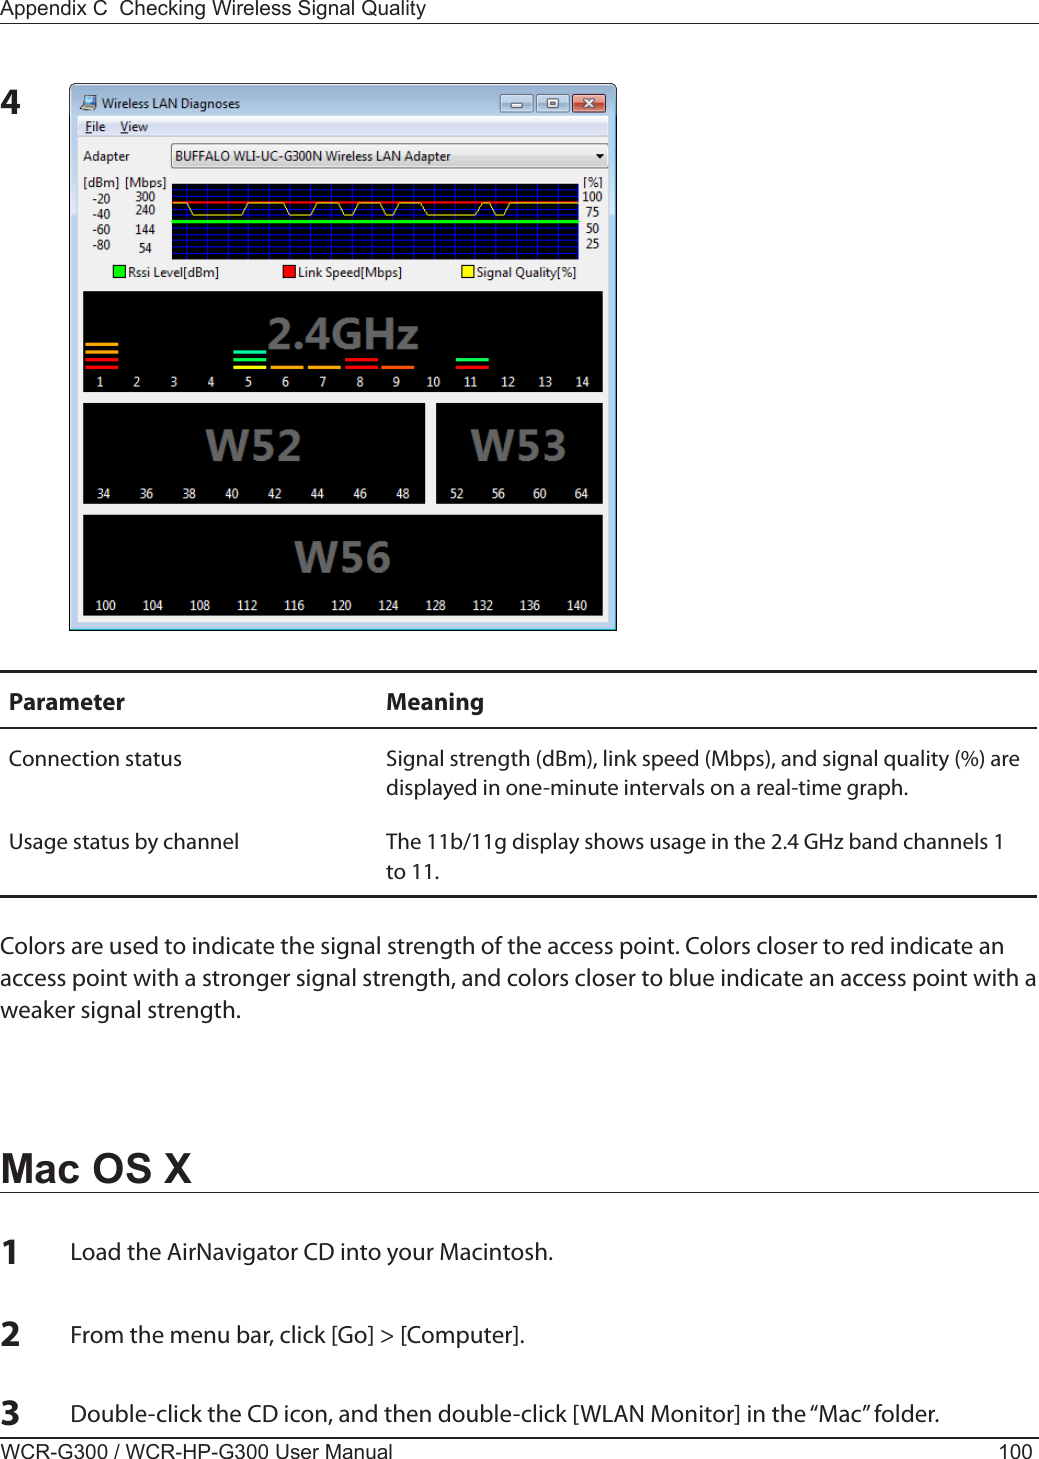 WCR-G300 / WCR-HP-G300 User Manual 100Appendix C  Checking Wireless Signal Quality4Parameter MeaningConnection status Signal strength (dBm), link speed (Mbps), and signal quality (%) are displayed in one-minute intervals on a real-time graph.Usage status by channel The 11b/11g display shows usage in the 2.4 GHz band channels 1 to 11.Colors are used to indicate the signal strength of the access point. Colors closer to red indicate an access point with a stronger signal strength, and colors closer to blue indicate an access point with a weaker signal strength.Mac OS X1Load the AirNavigator CD into your Macintosh.2From the menu bar, click [Go] &gt; [Computer].3Double-click the CD icon, and then double-click [WLAN Monitor] in the “Mac” folder.